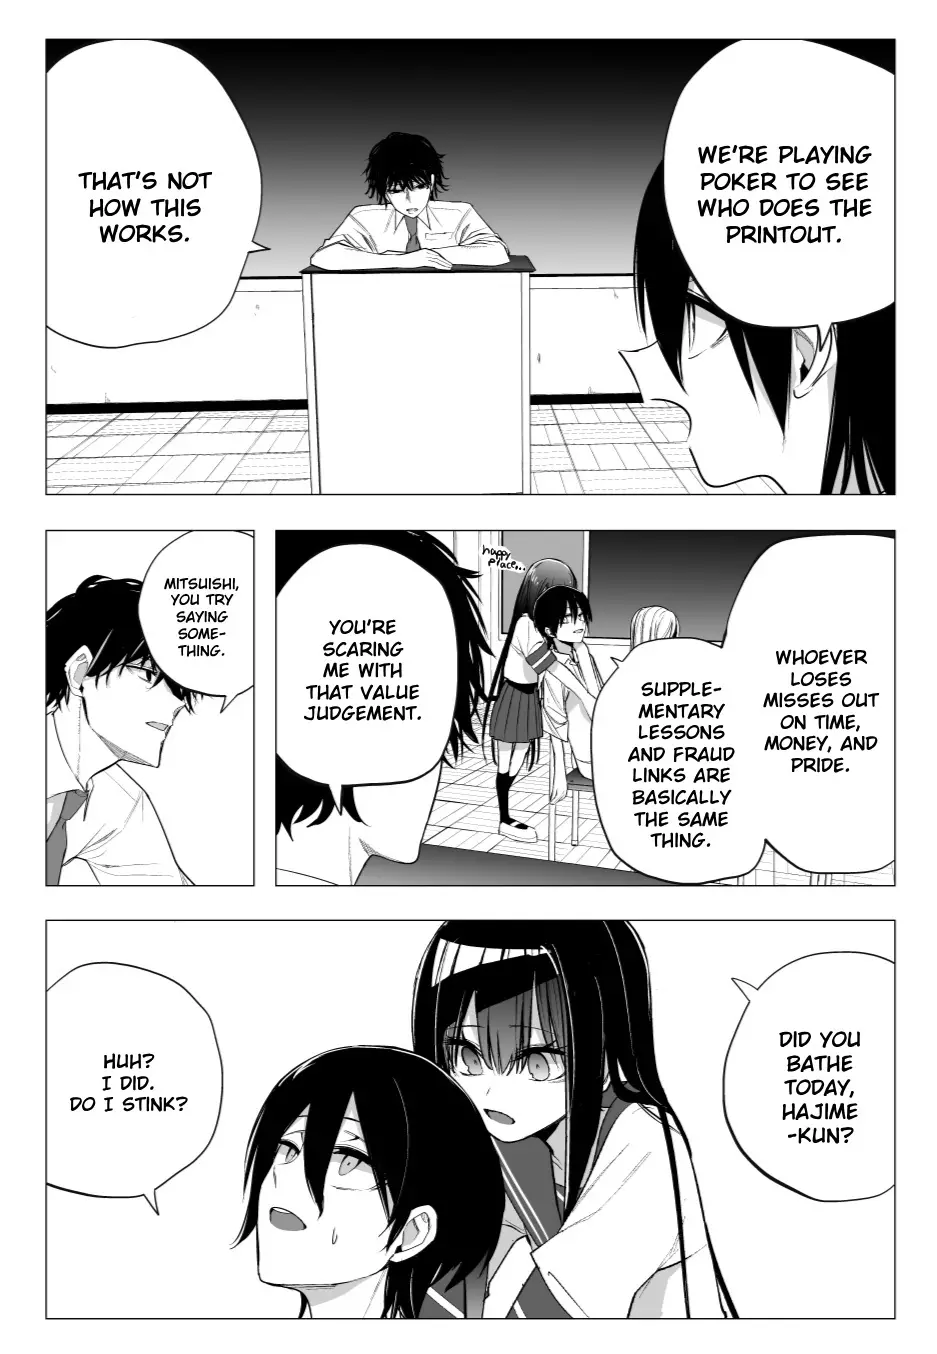 Mitsuishi-San Is Being Weird This Year - 33 page 4-e247154c